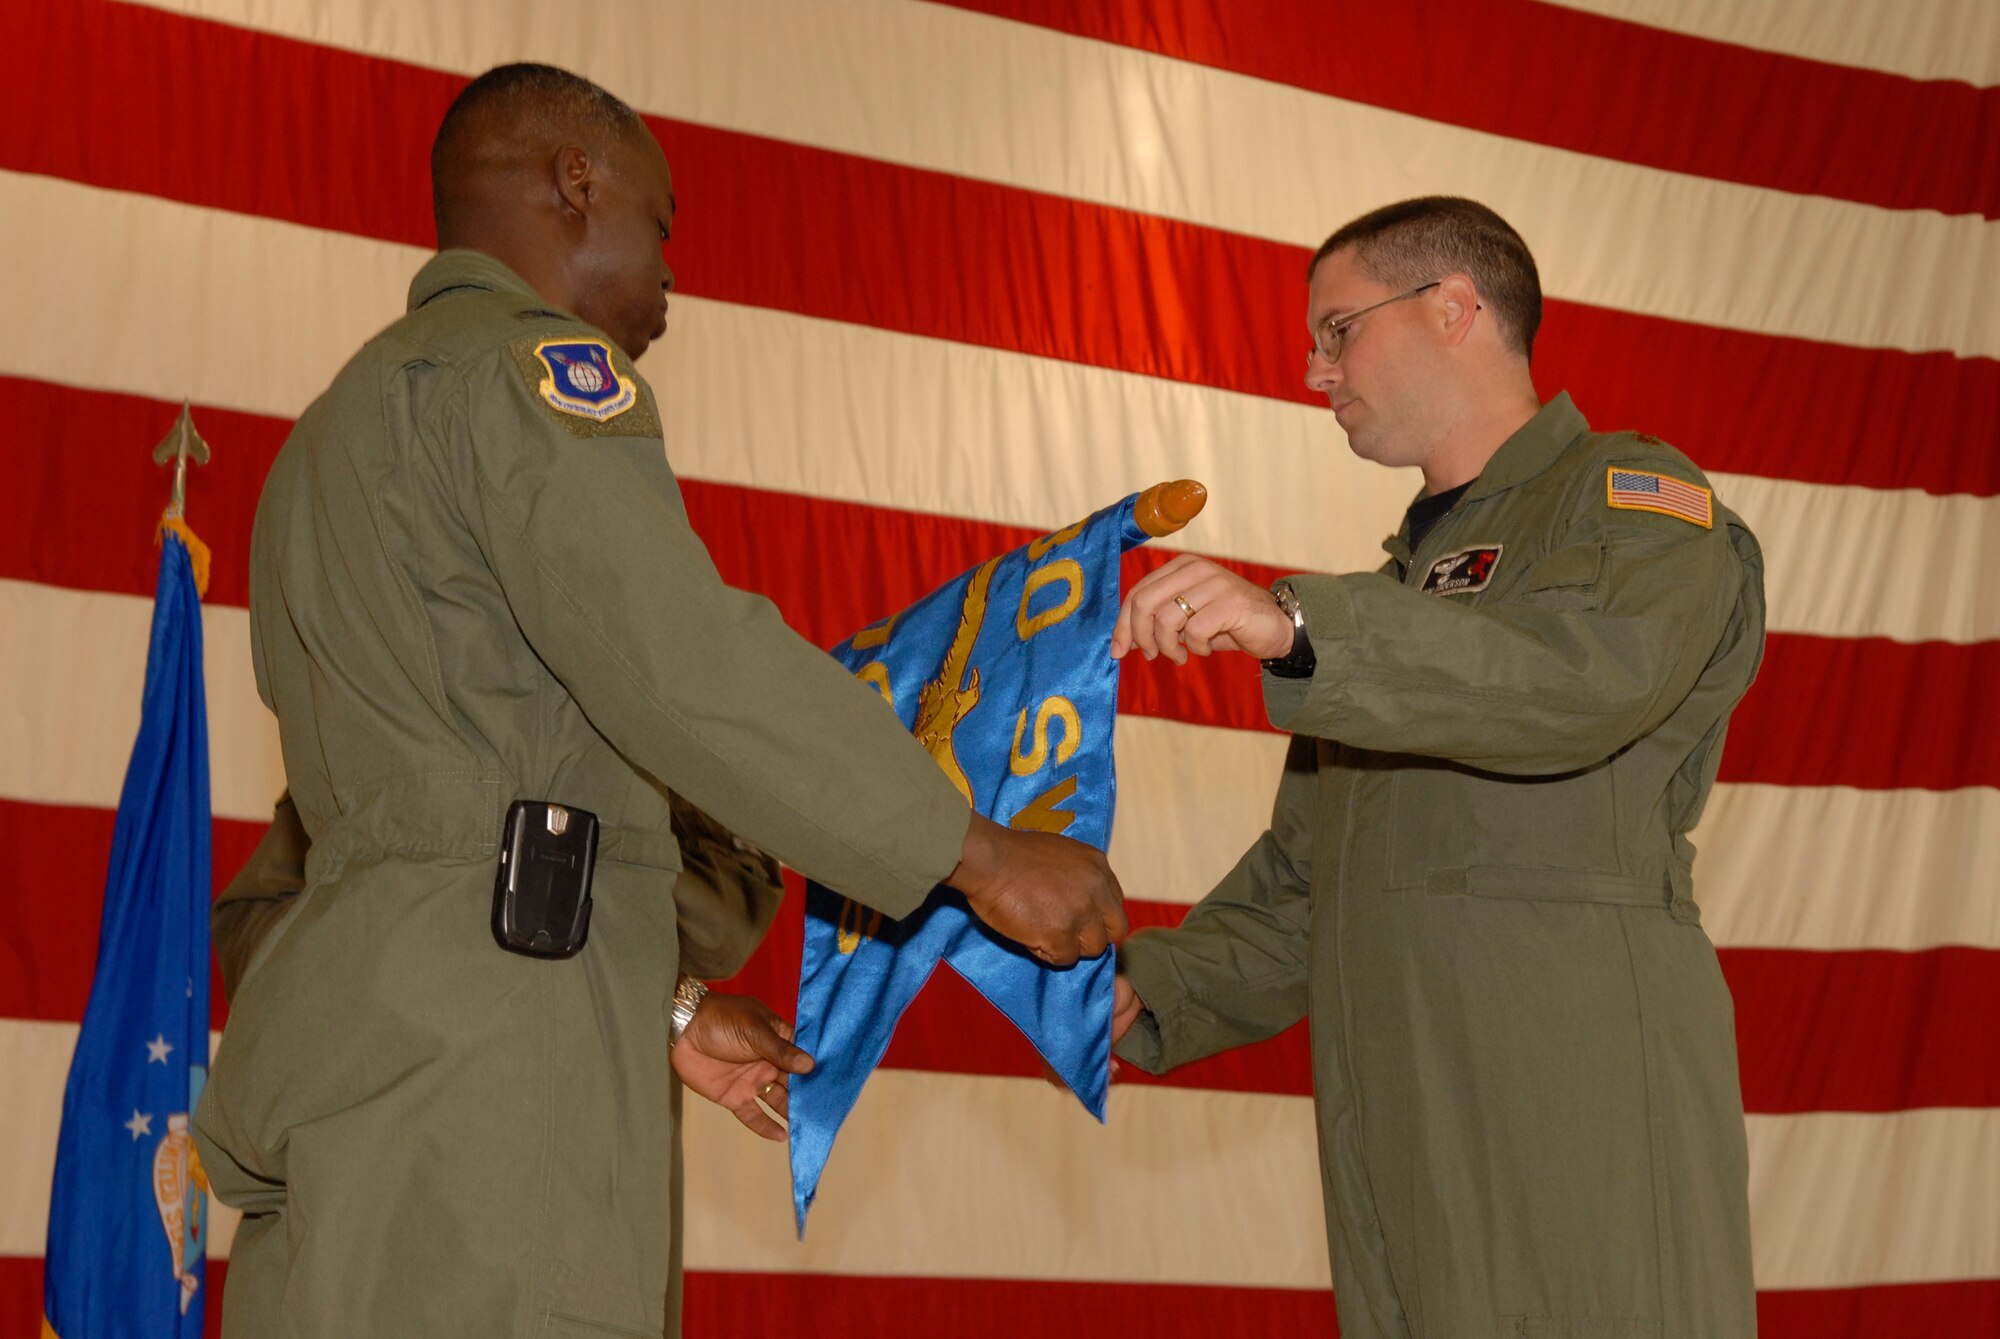 VANDENBERG AIR FORCE BASE, Calif. -- 30th Operations Group Commander Col. Andre Lovett furls the 76th Helicopter Squadron's guidon flag with the unit's final commander during the 76th HS inactivation ceremony at the hangar on Aug. 2.  The squadron supported space launch, land and water rescue, fire suppression and many diverse training missions.  (U.S. Air Force photo/Airman 1st Class Adam Guy)